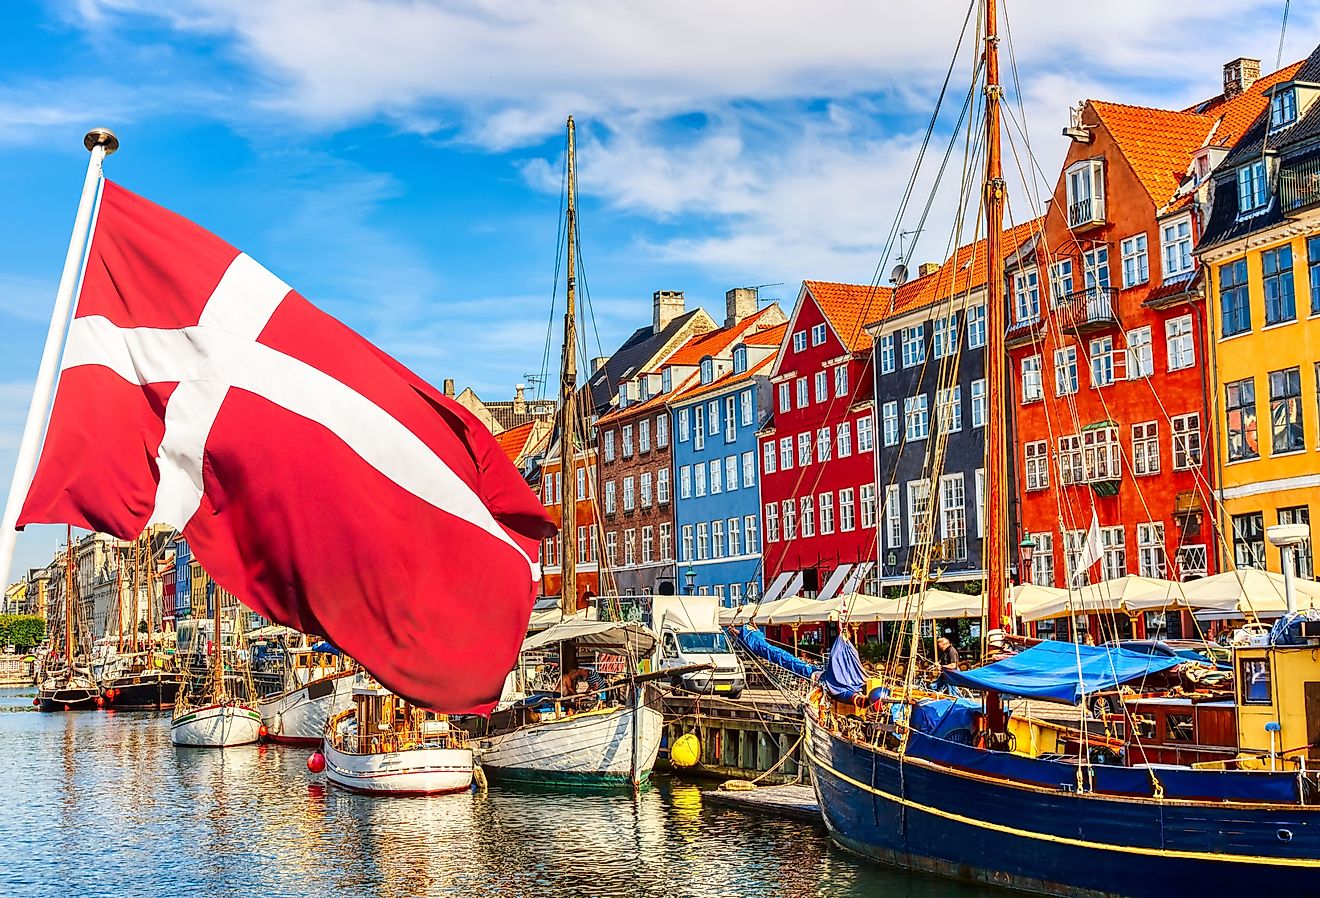 Denmark is one of the best countries to live in the world. Image credit Nick N A via Shutterstock